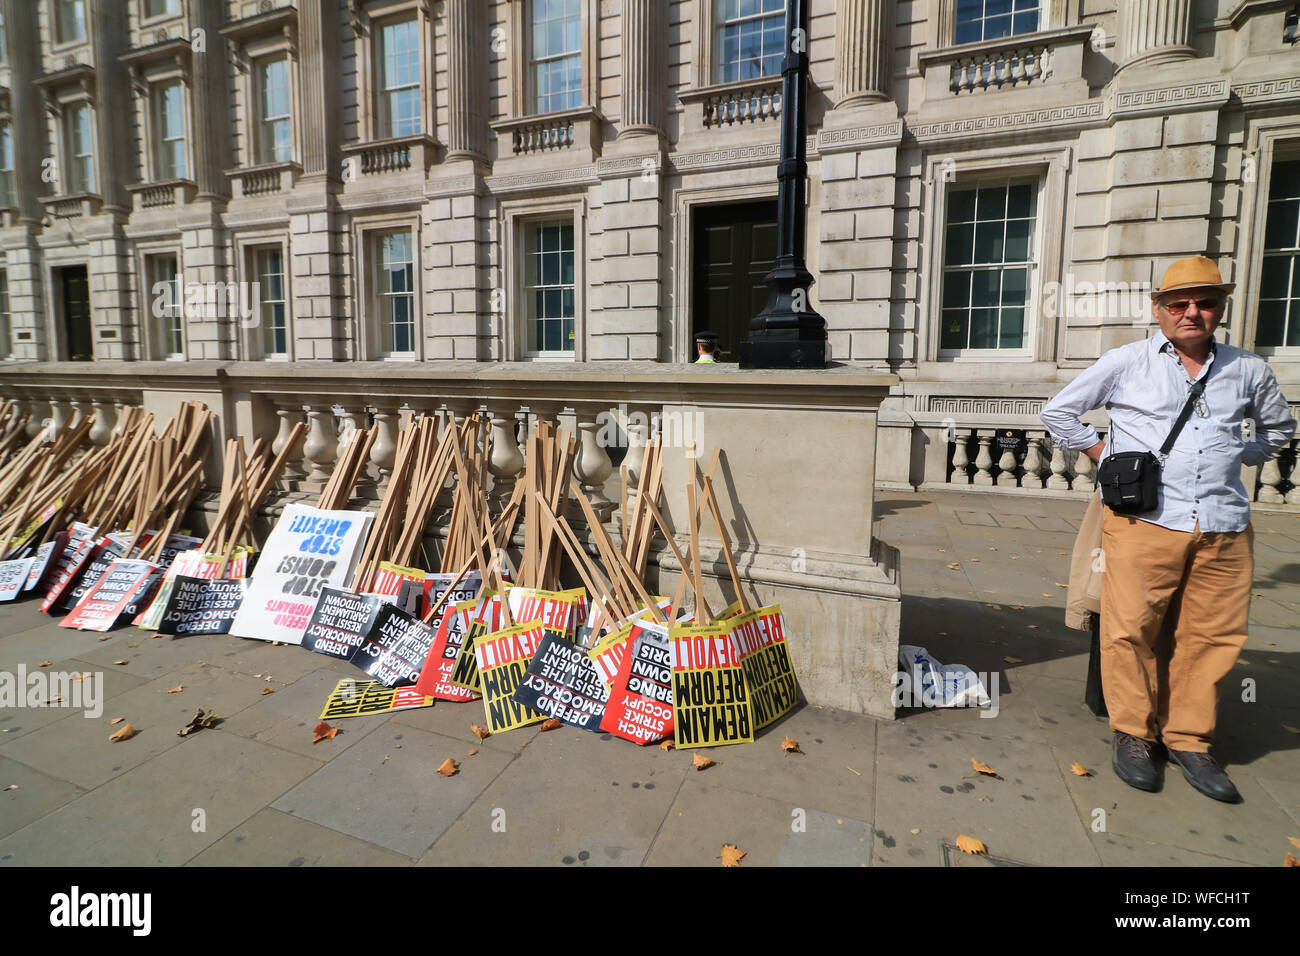 London, UK. 31st August 2019. Placards by Pro Remain supporters and activists  as they begin to  gather outside Downing  and Whitehall  to protest against the decision by the government to suspend Parliament from 9 September to 14 October  by Prime Minister Boris Johnson Credit: amer ghazzal/Alamy Live News Stock Photo